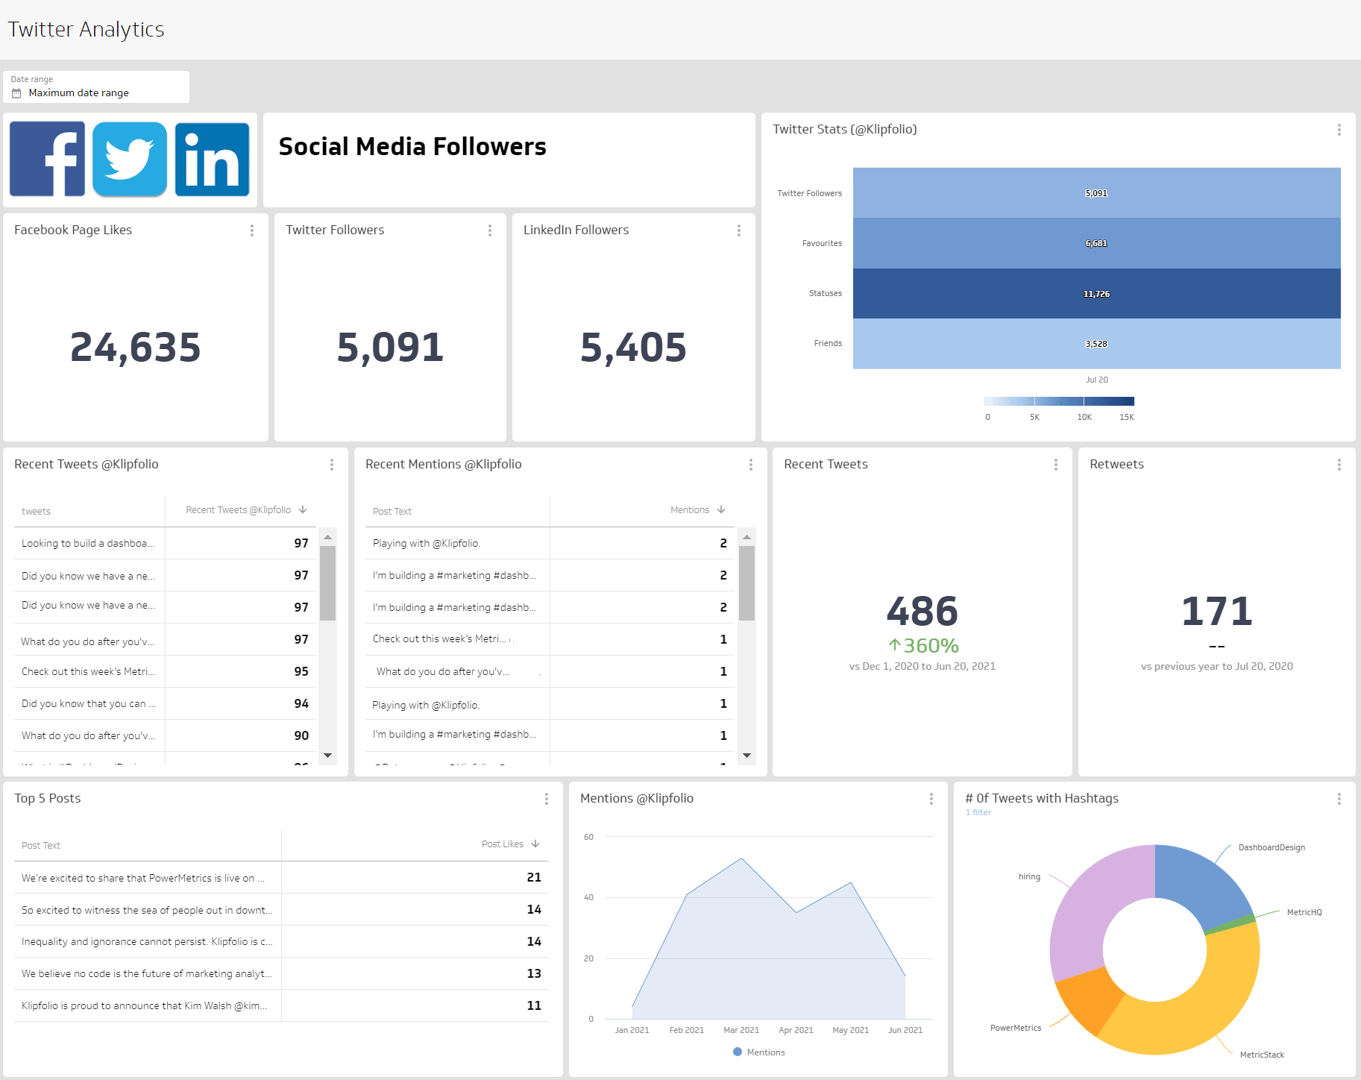 Related Dashboard Examples - Twitter Analytics Dashboard